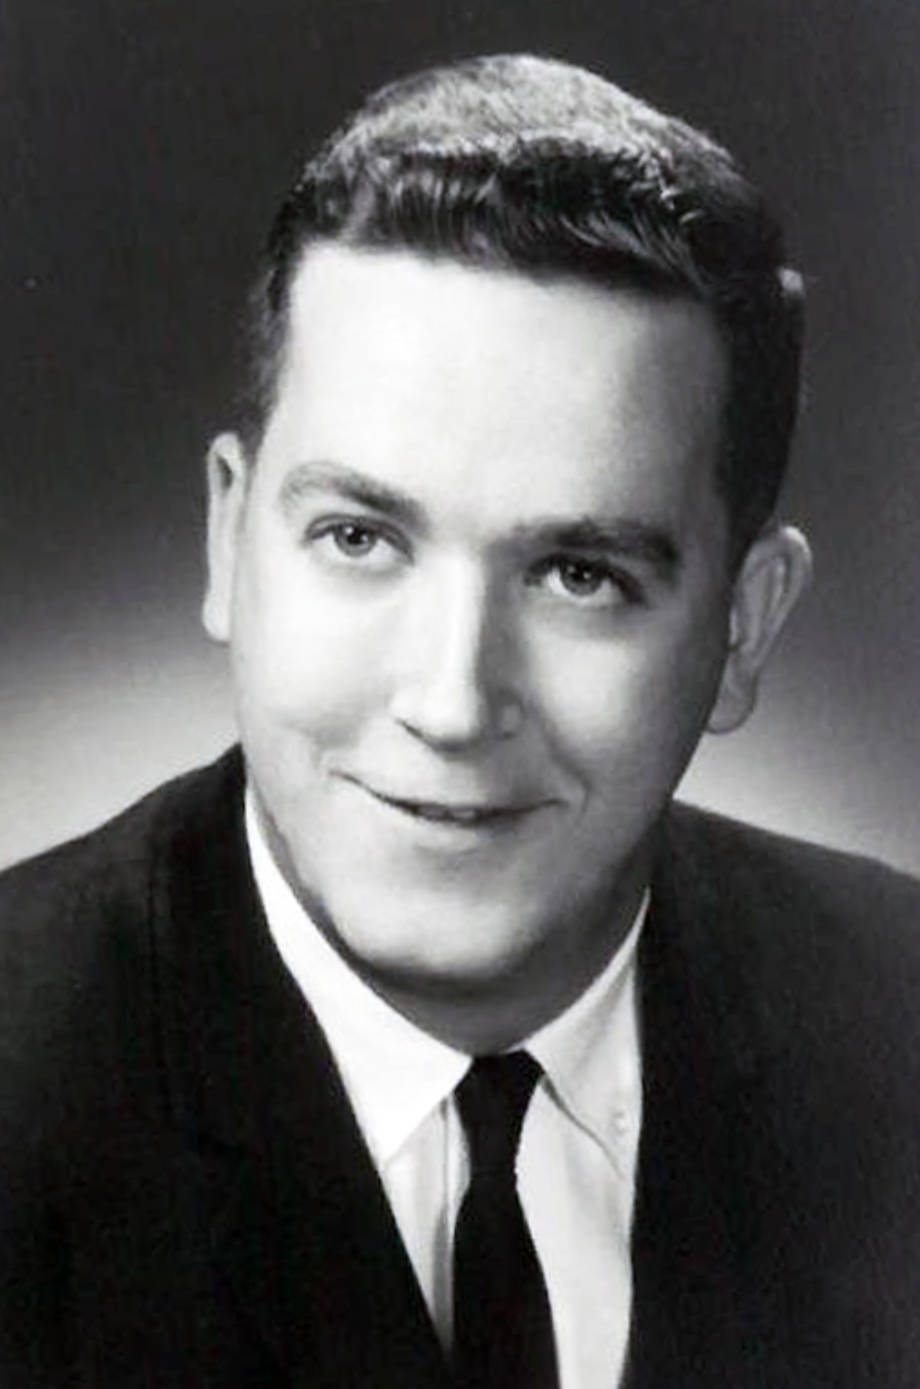 Ron Wenneker, in his early 20s. This is believed to be one of the first professional photos that he had taken after becoming an insurance agent. Photo courtesy of Robin Wenneker.